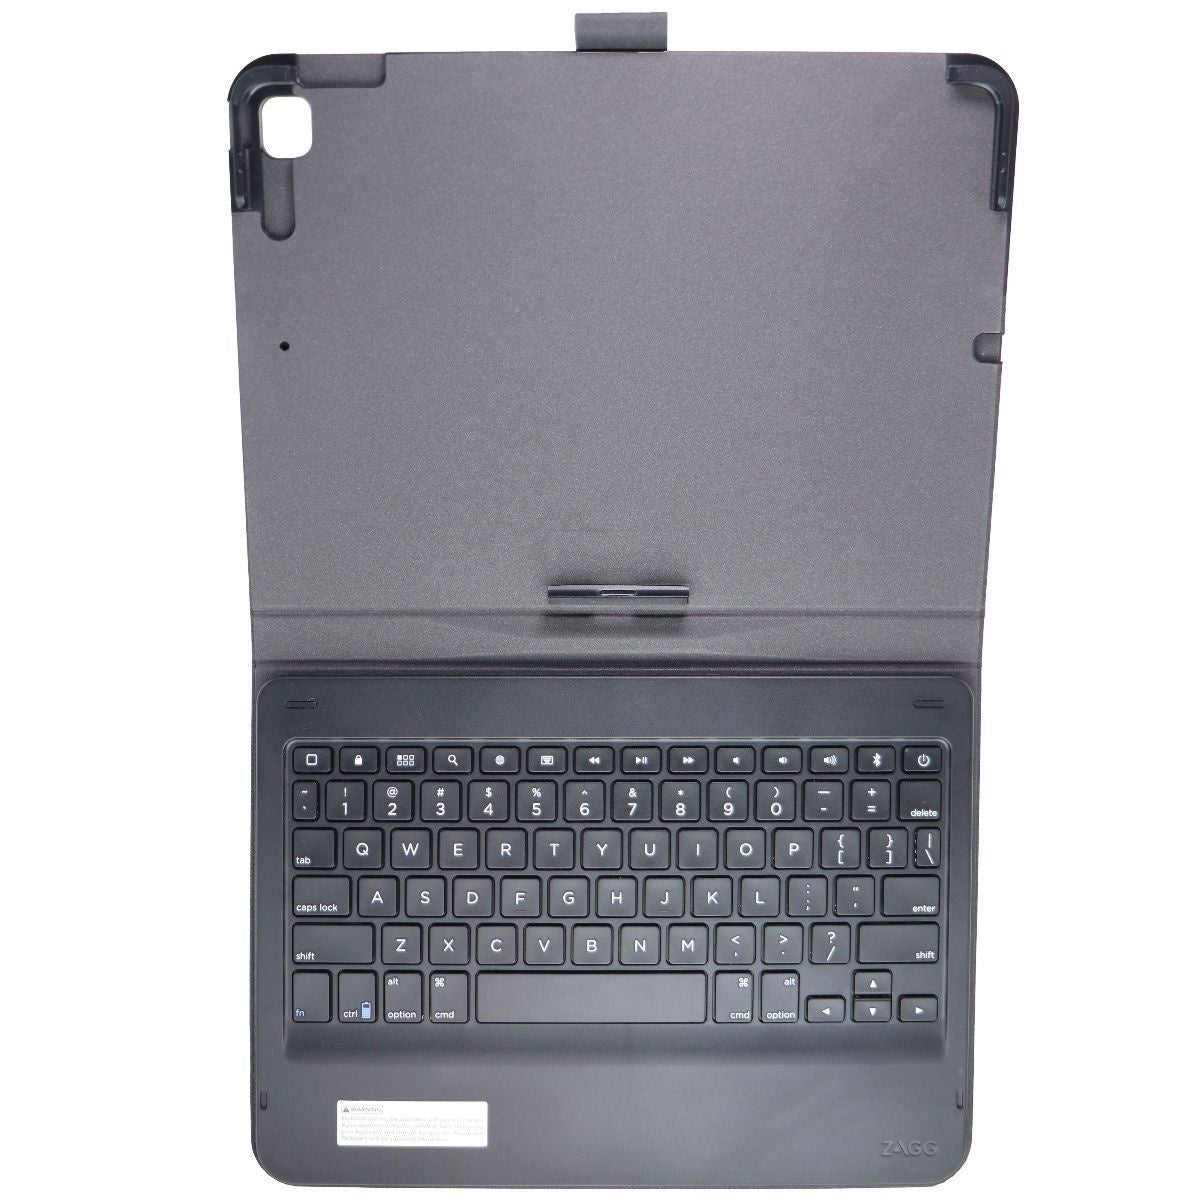 ZAGG Messenger Folio Keyboard Case for Apple iPad 10.2 / Air 3 / Pro 10.5 - Blk iPad/Tablet Accessories - Cases, Covers, Keyboard Folios Zagg    - Simple Cell Bulk Wholesale Pricing - USA Seller